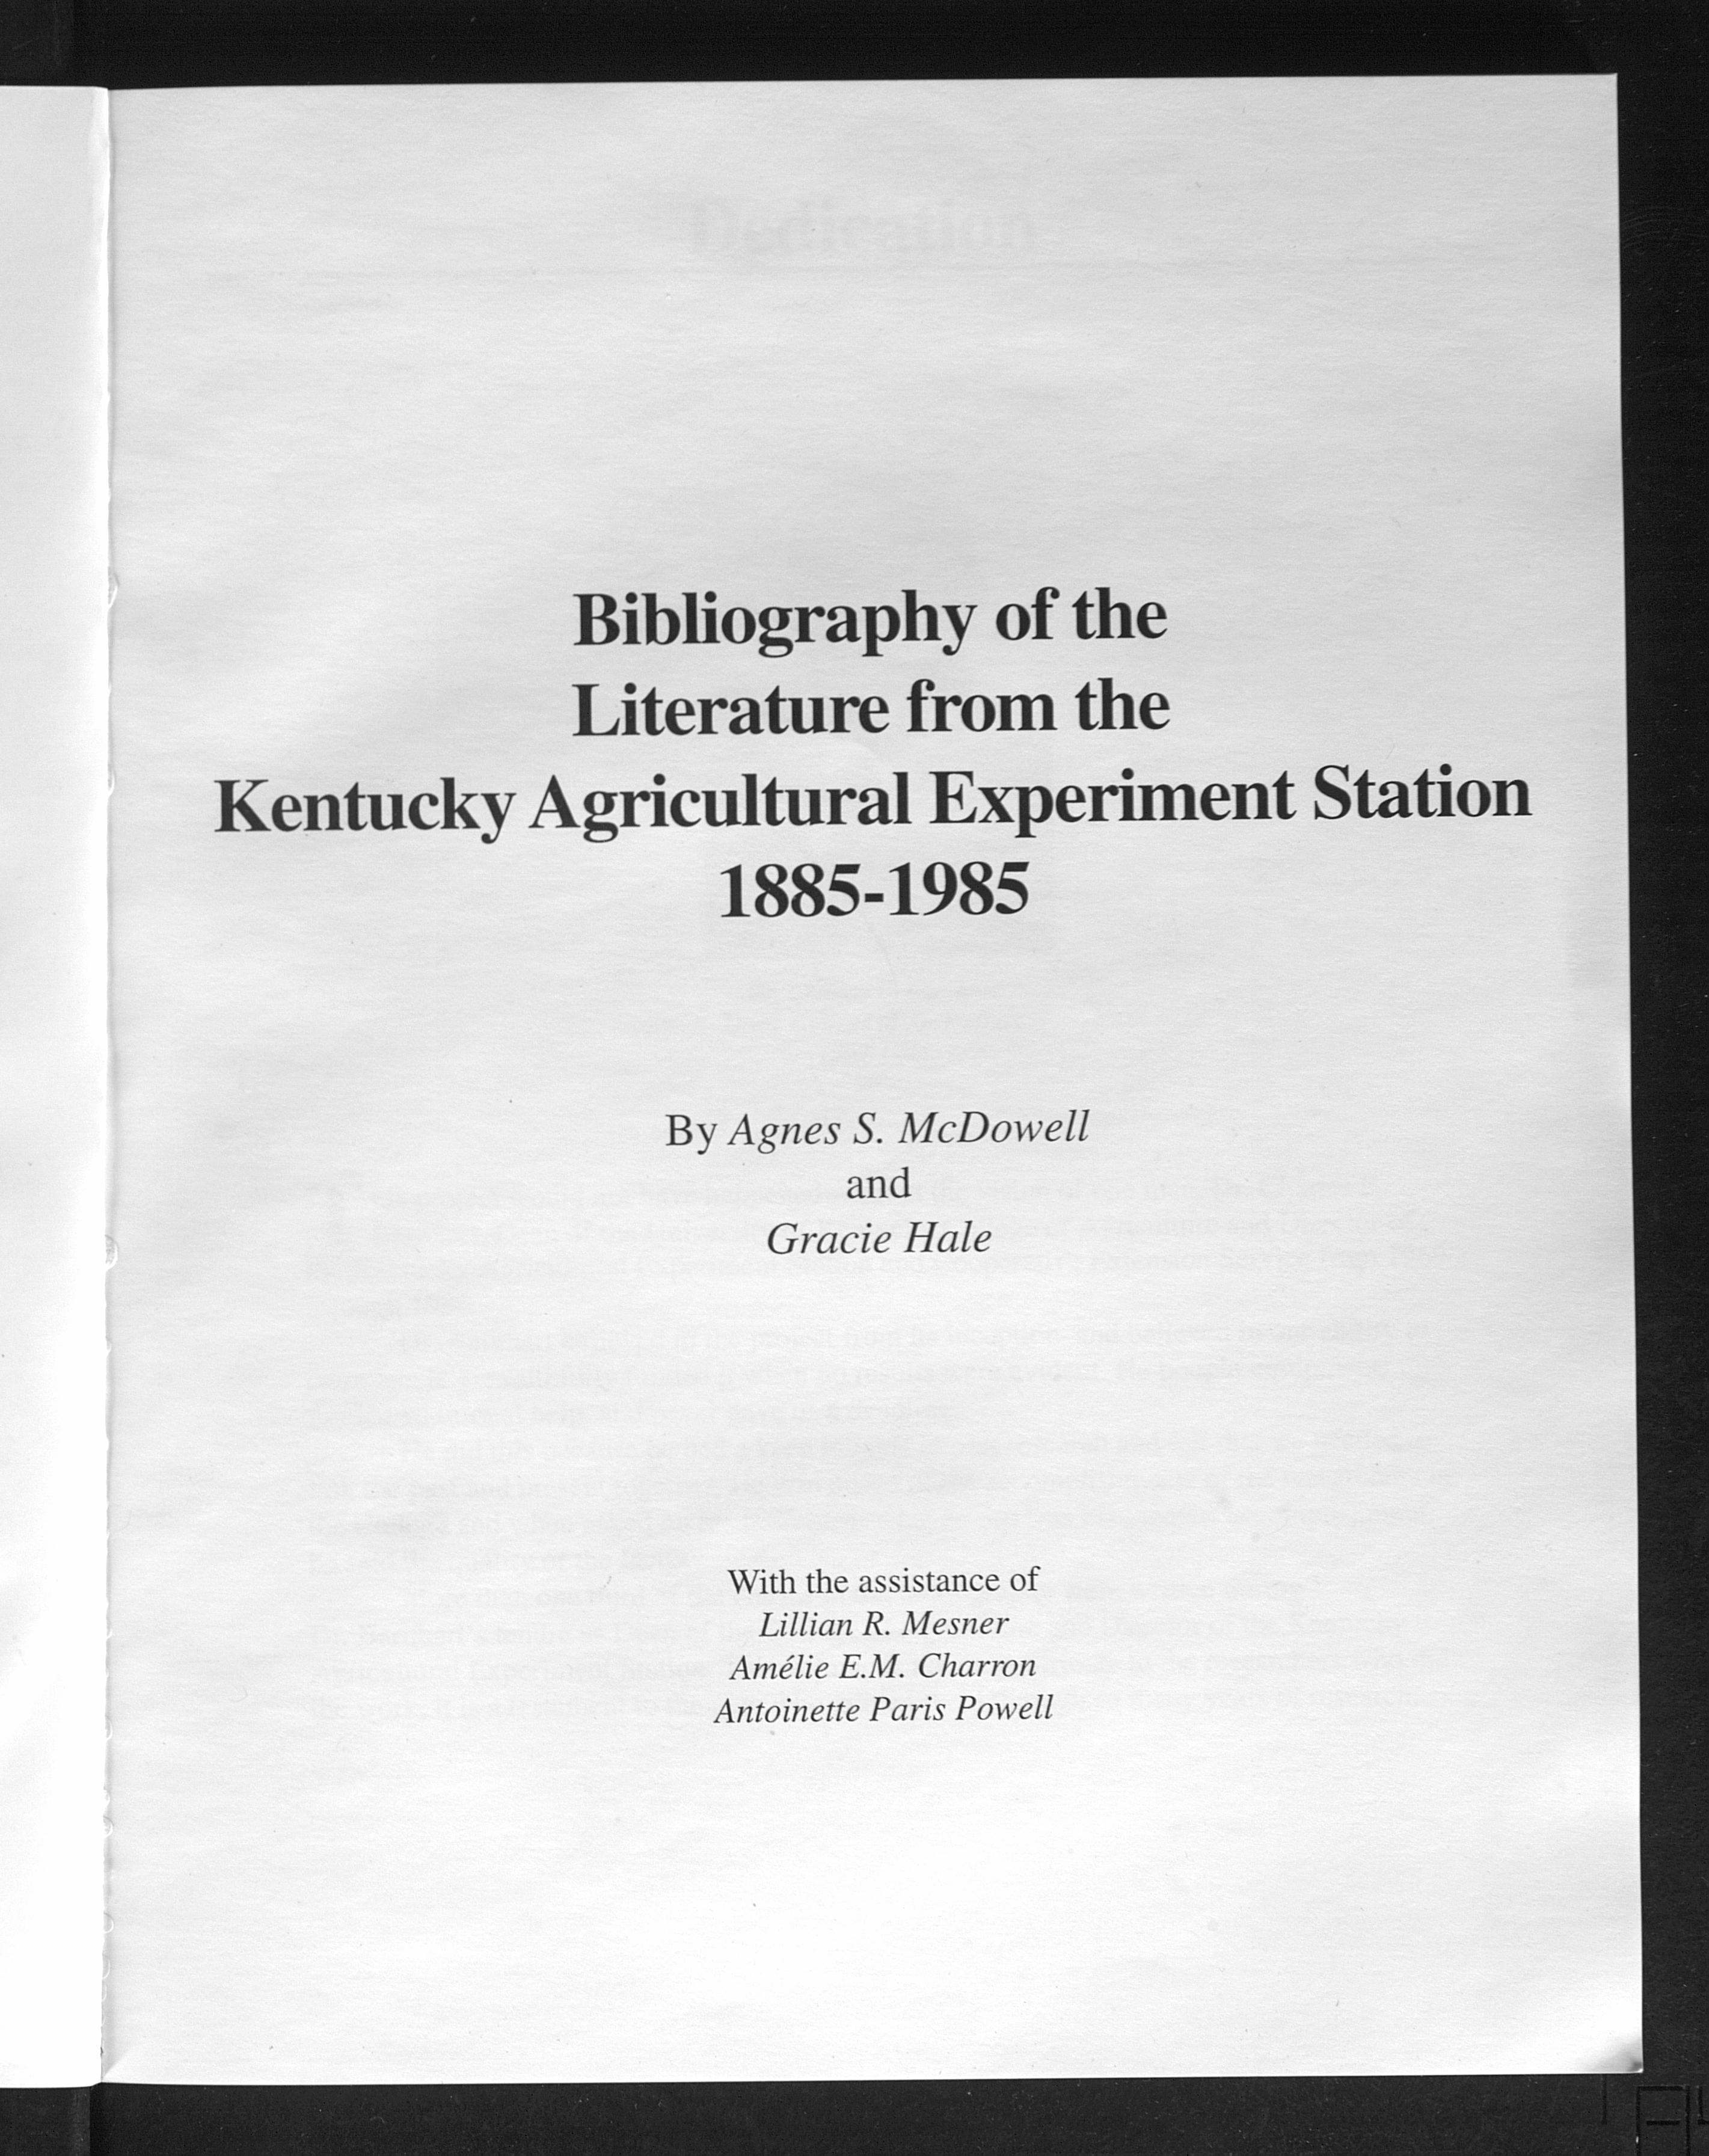 Bibliography of the literature from the Kentucky Agricultural Experiment Station, 1885-1985. pic